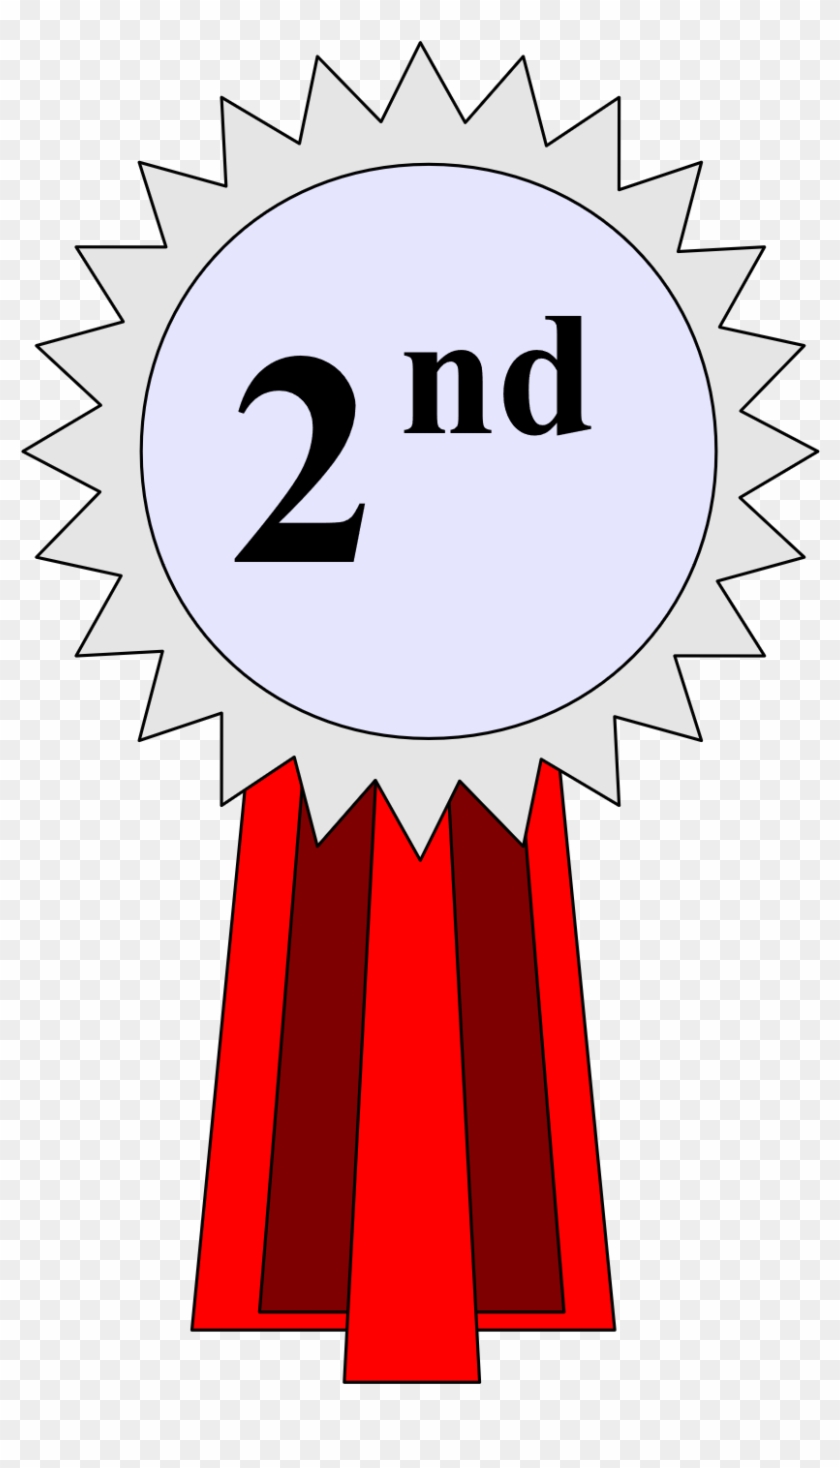 2nd Place Medal Clipart - 2nd Place Ribbon Clip Art #302479